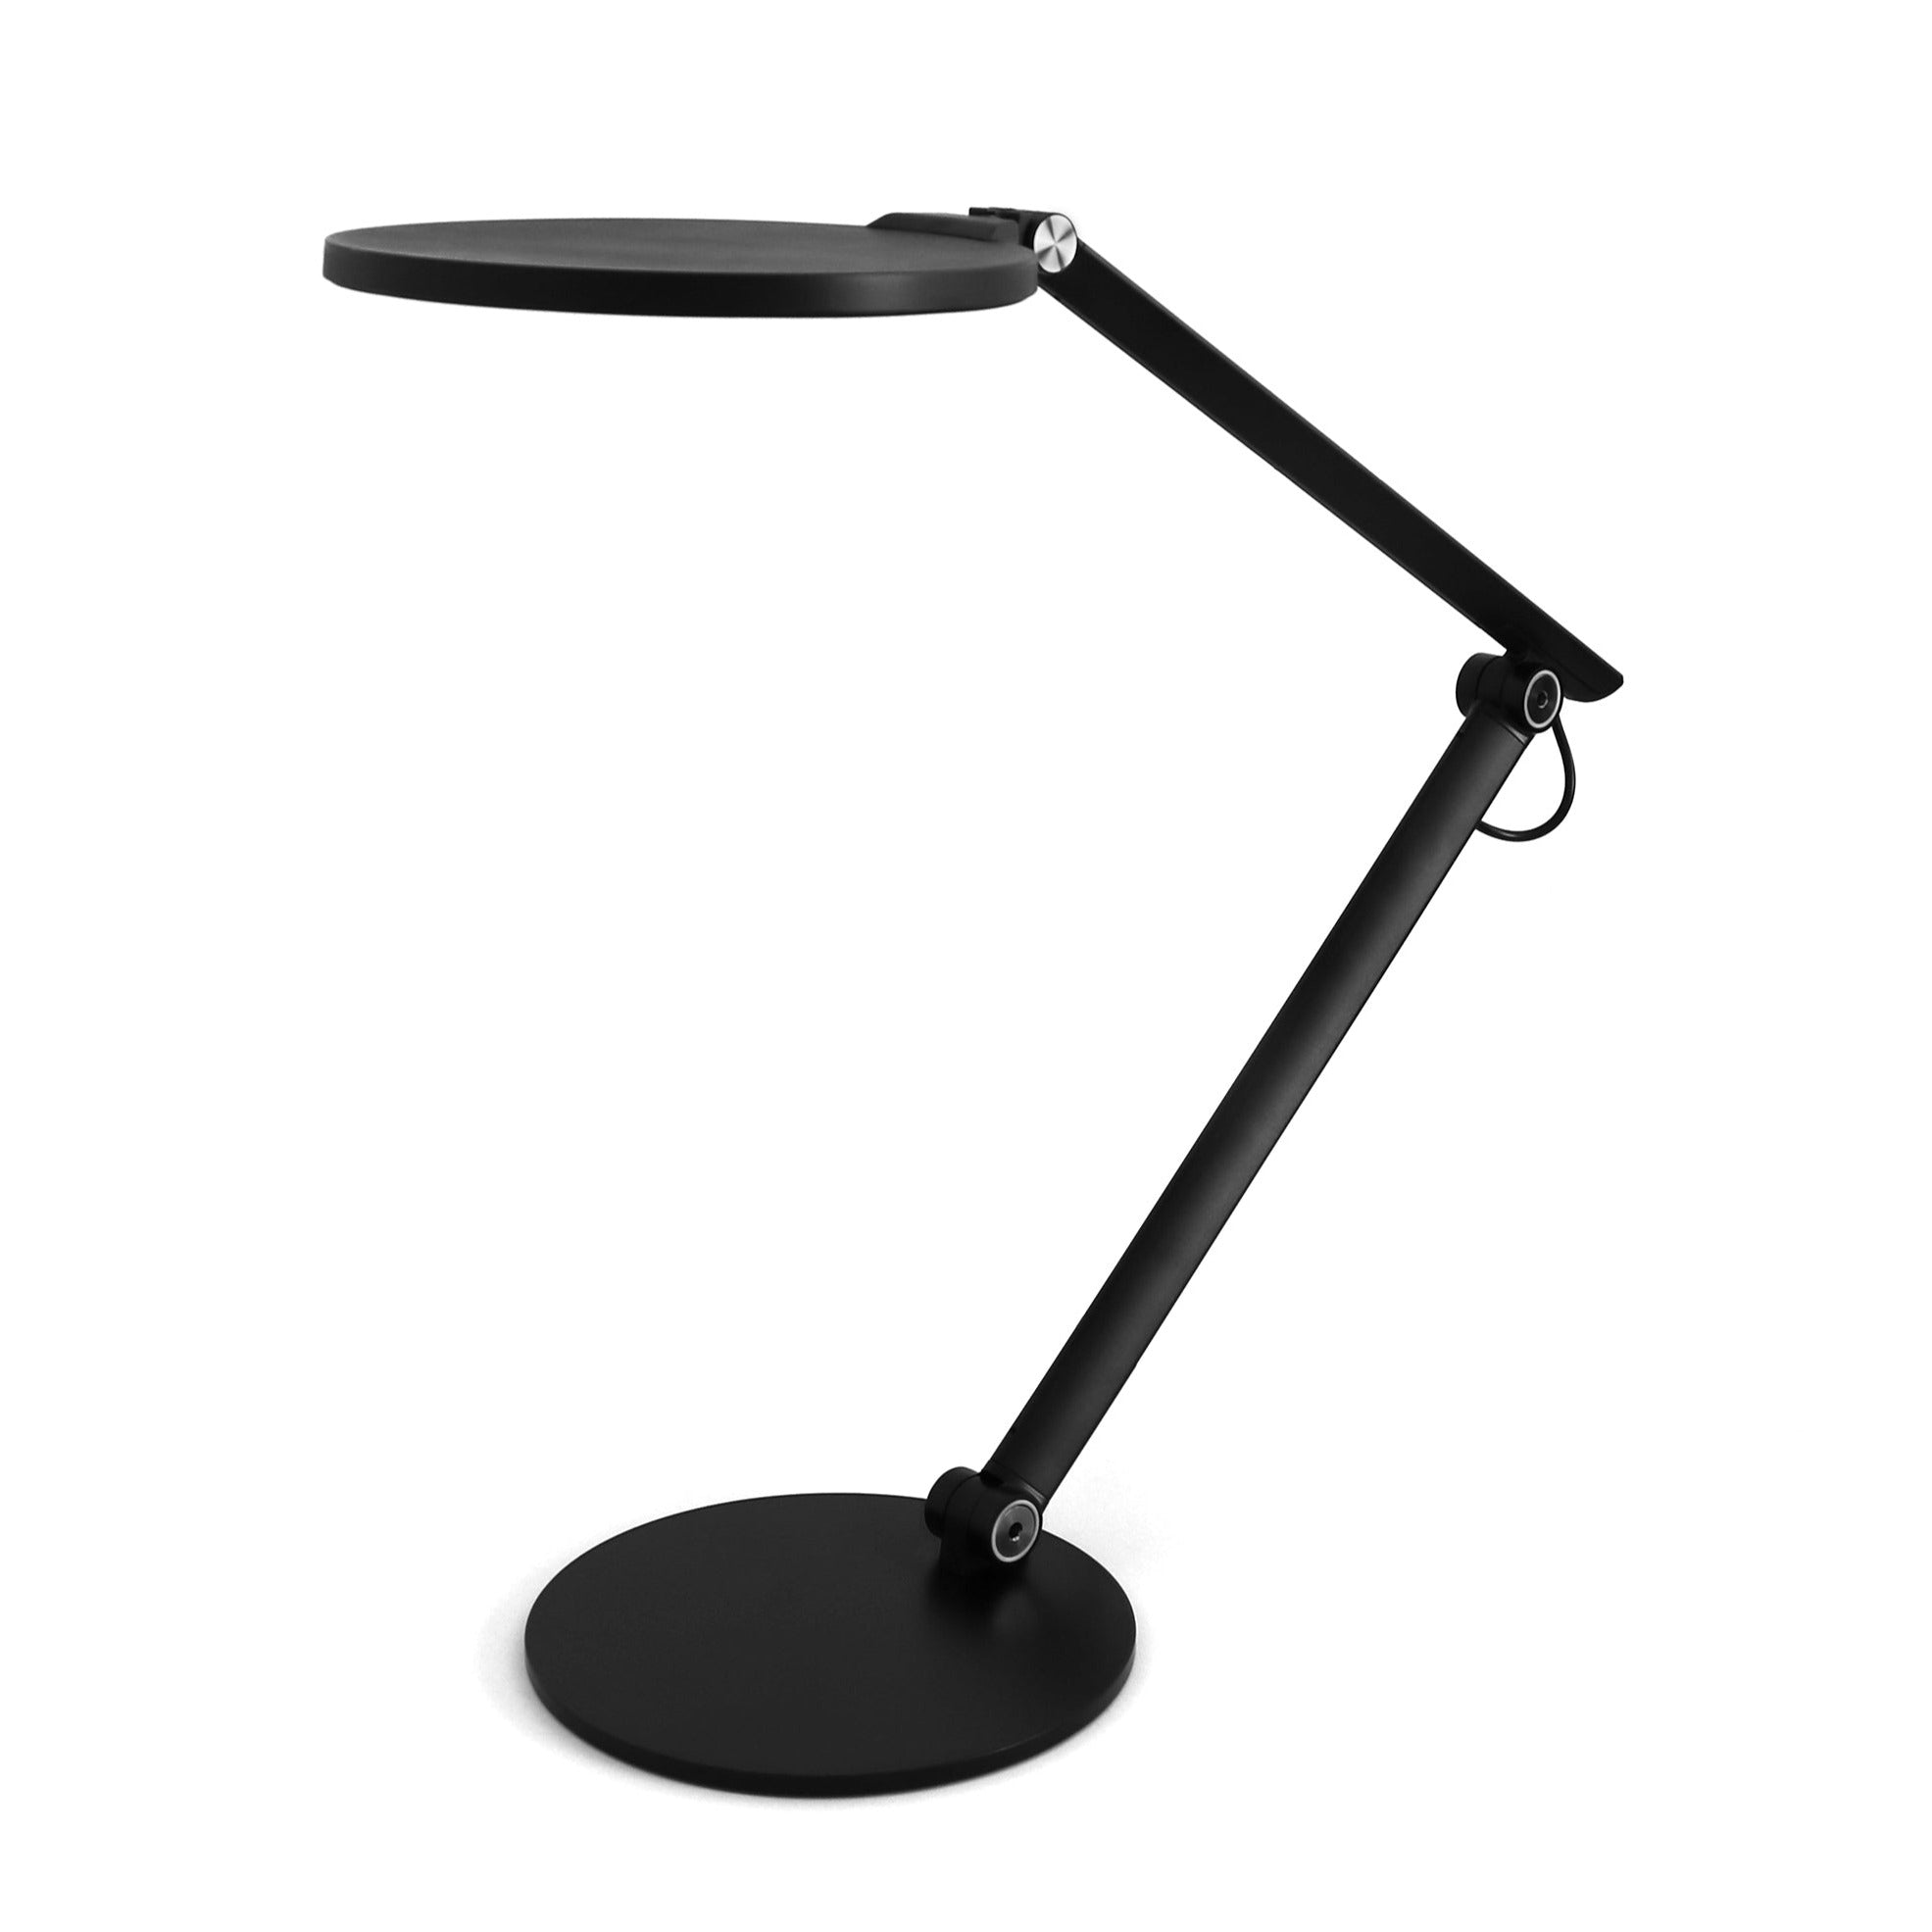 Desk Makeup Lamp USB Black Dimmable Cool To Warm Light